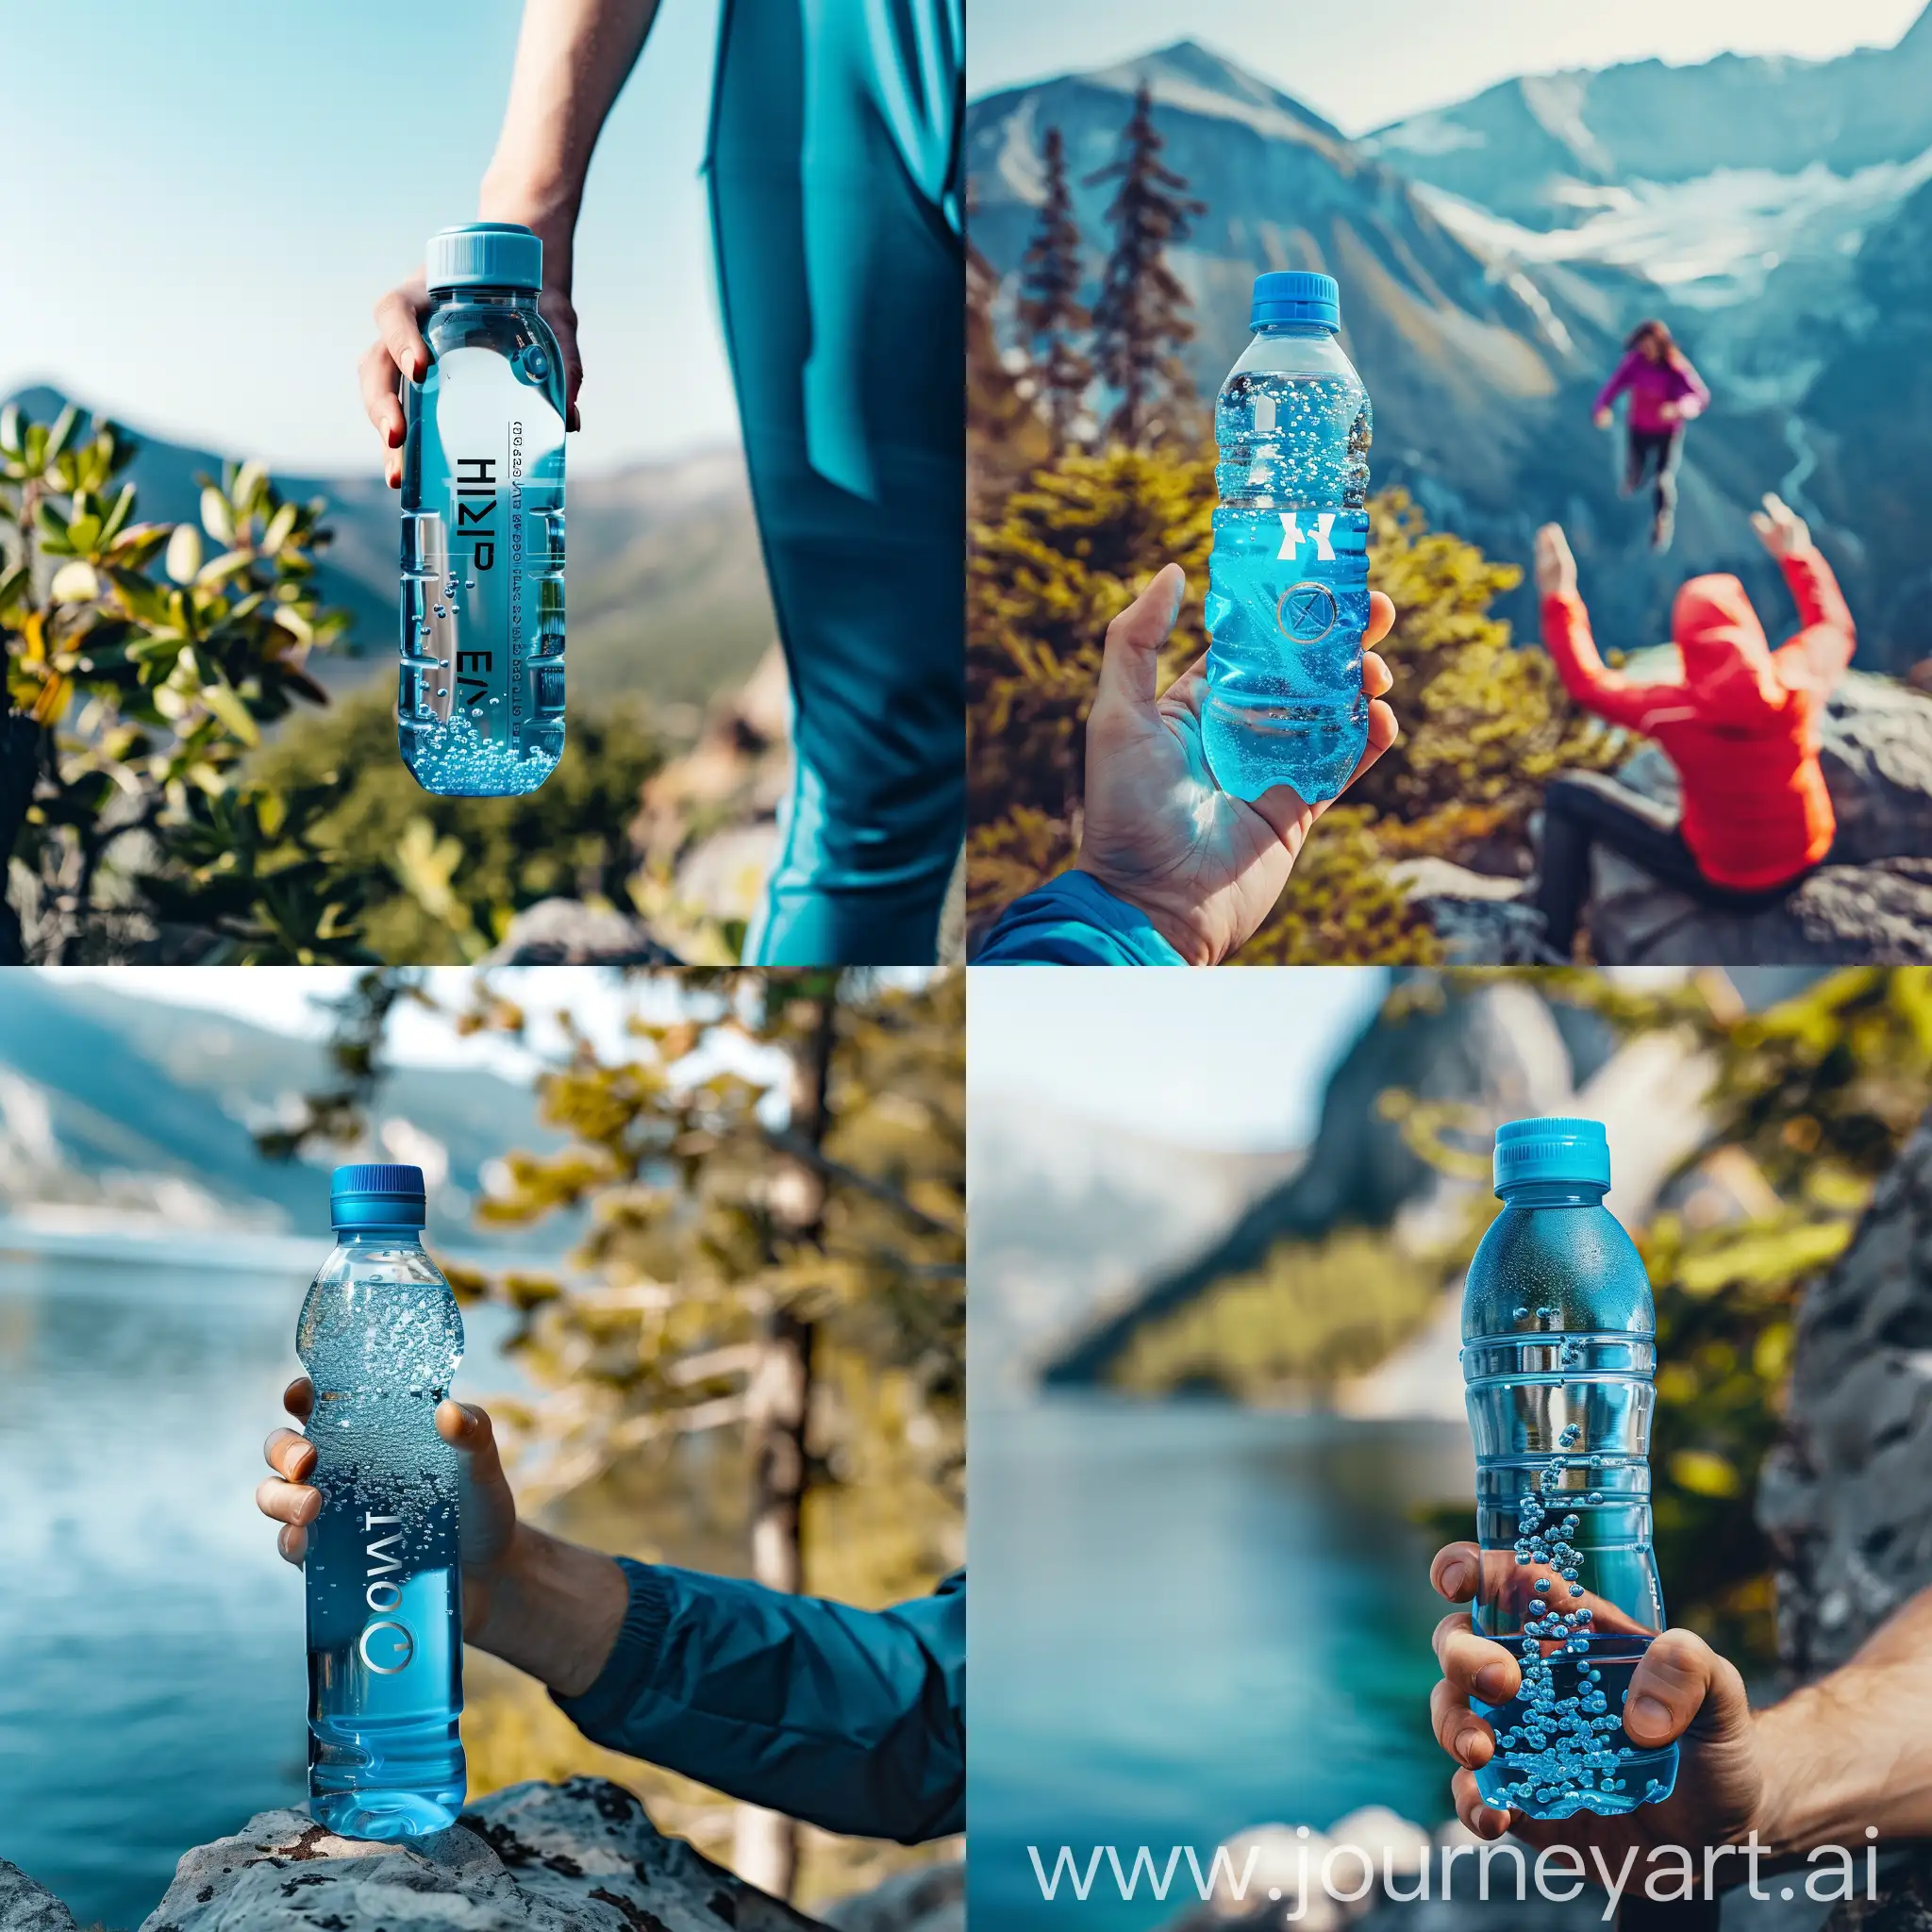 Outdoor-Enthusiast-with-HydrogenInfused-Water-Bottle